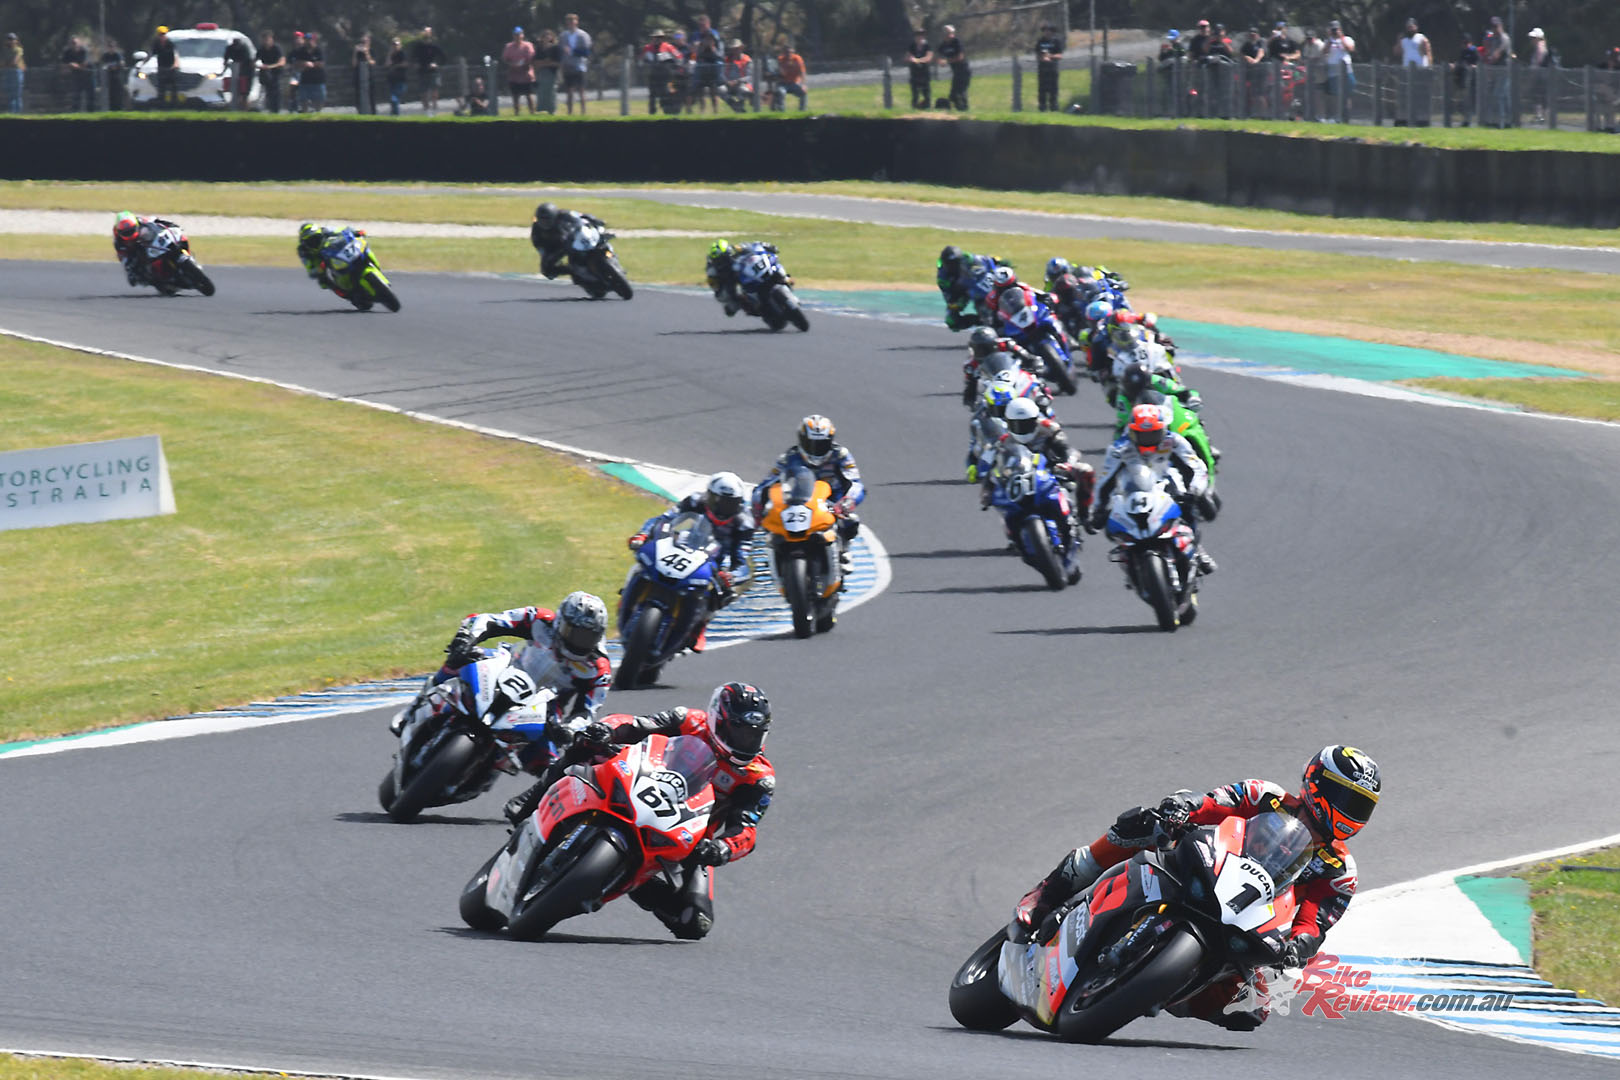 Wayne Maxwell (Ducati V4R) was the only rider in the 1:31’s and was looking untouchable until a stumble on lap 5 saw last year’s ASBK champion crash out at turn eight. Photo: A. Bear...